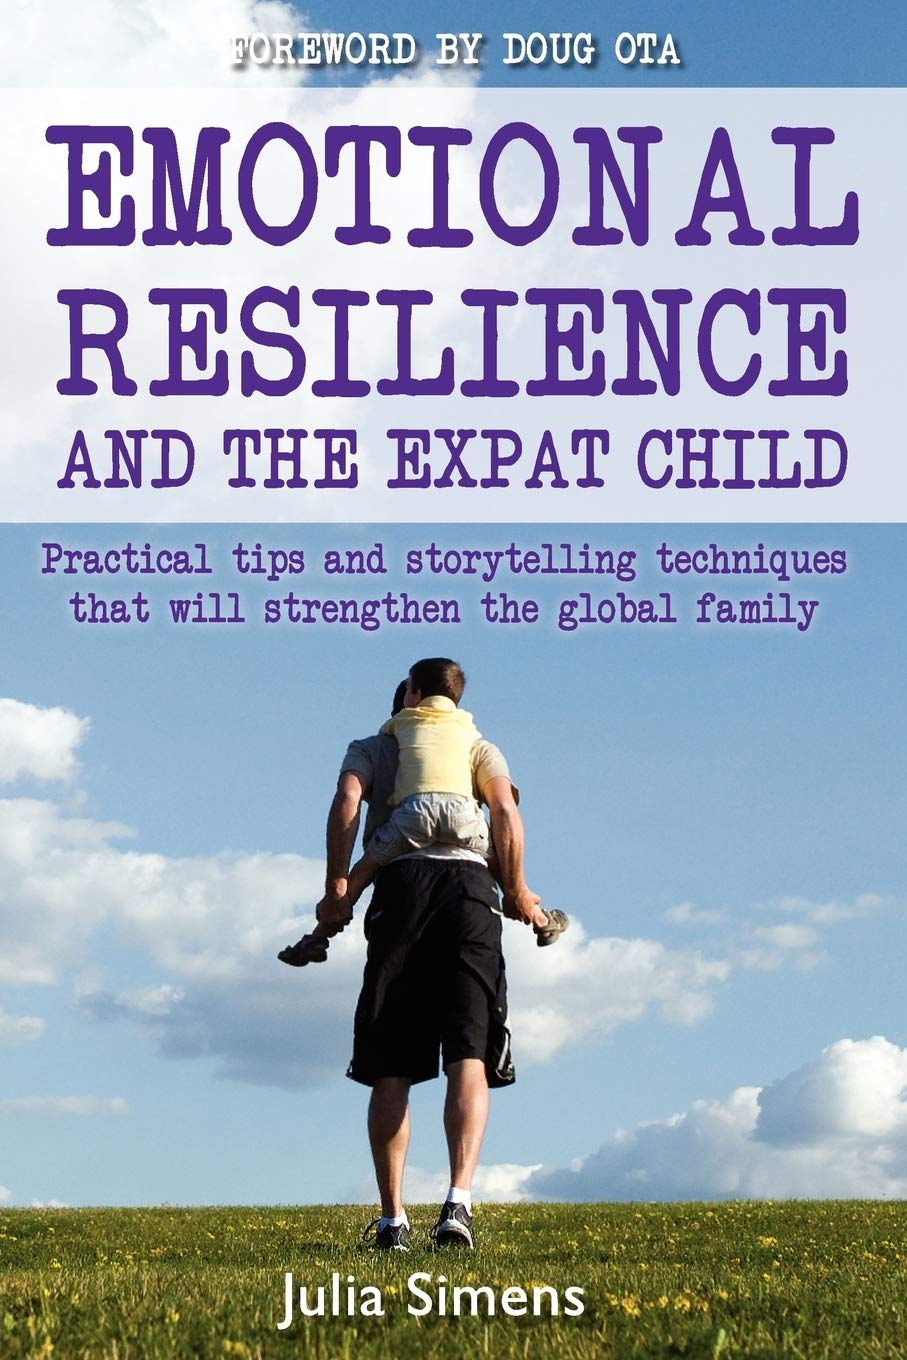 Emotional Resilience and the Expat Child: Practical Storytelling Techniques That Will Strengthen the Global Family - Amazon